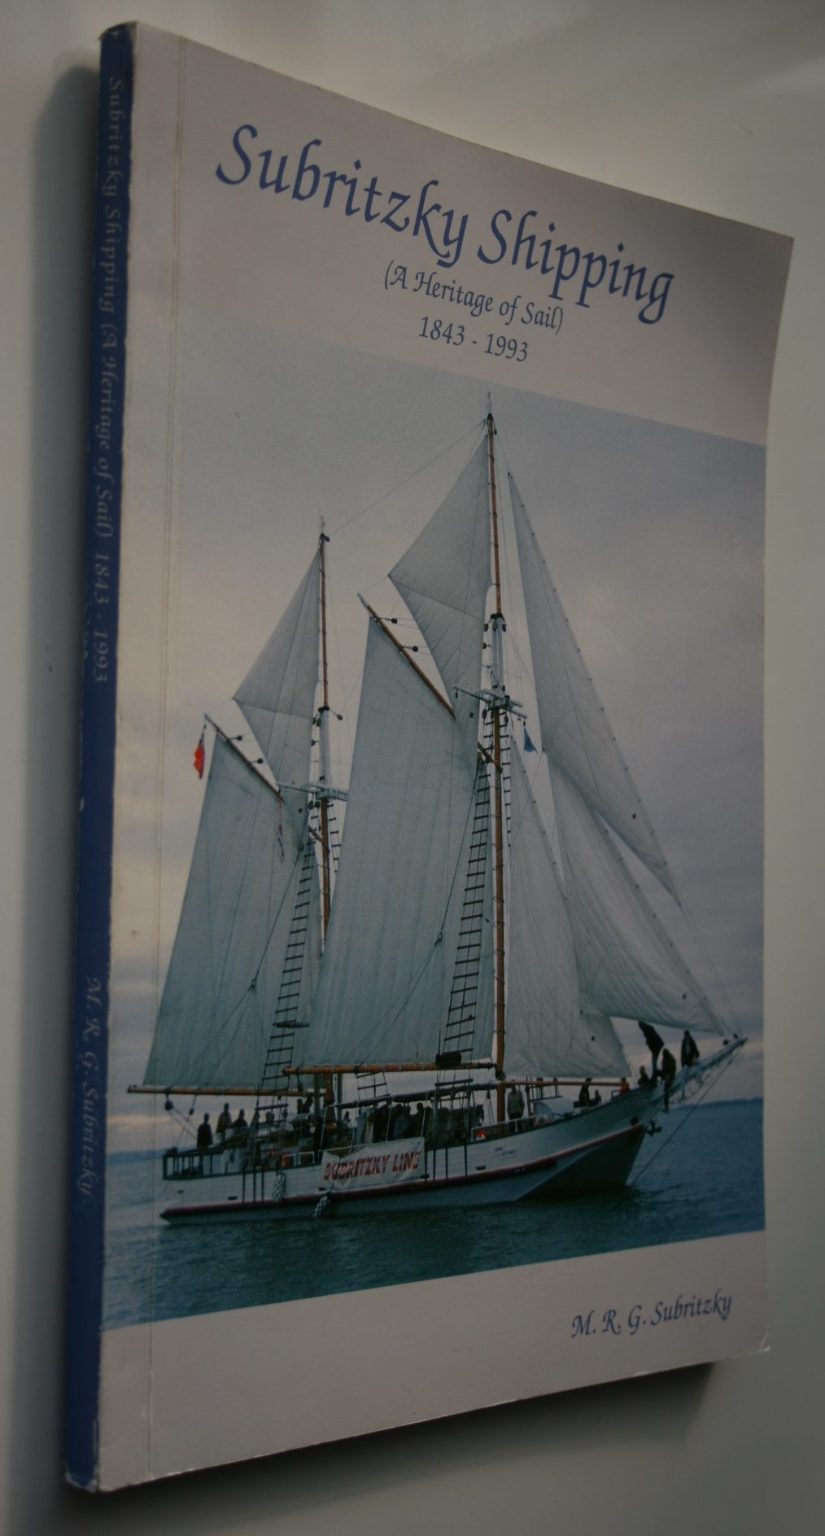 Subritzky Shipping (A Heritage of Sail) 1843 - 1993. by Mike Subritzky. SIGNED BY AUTHOR.